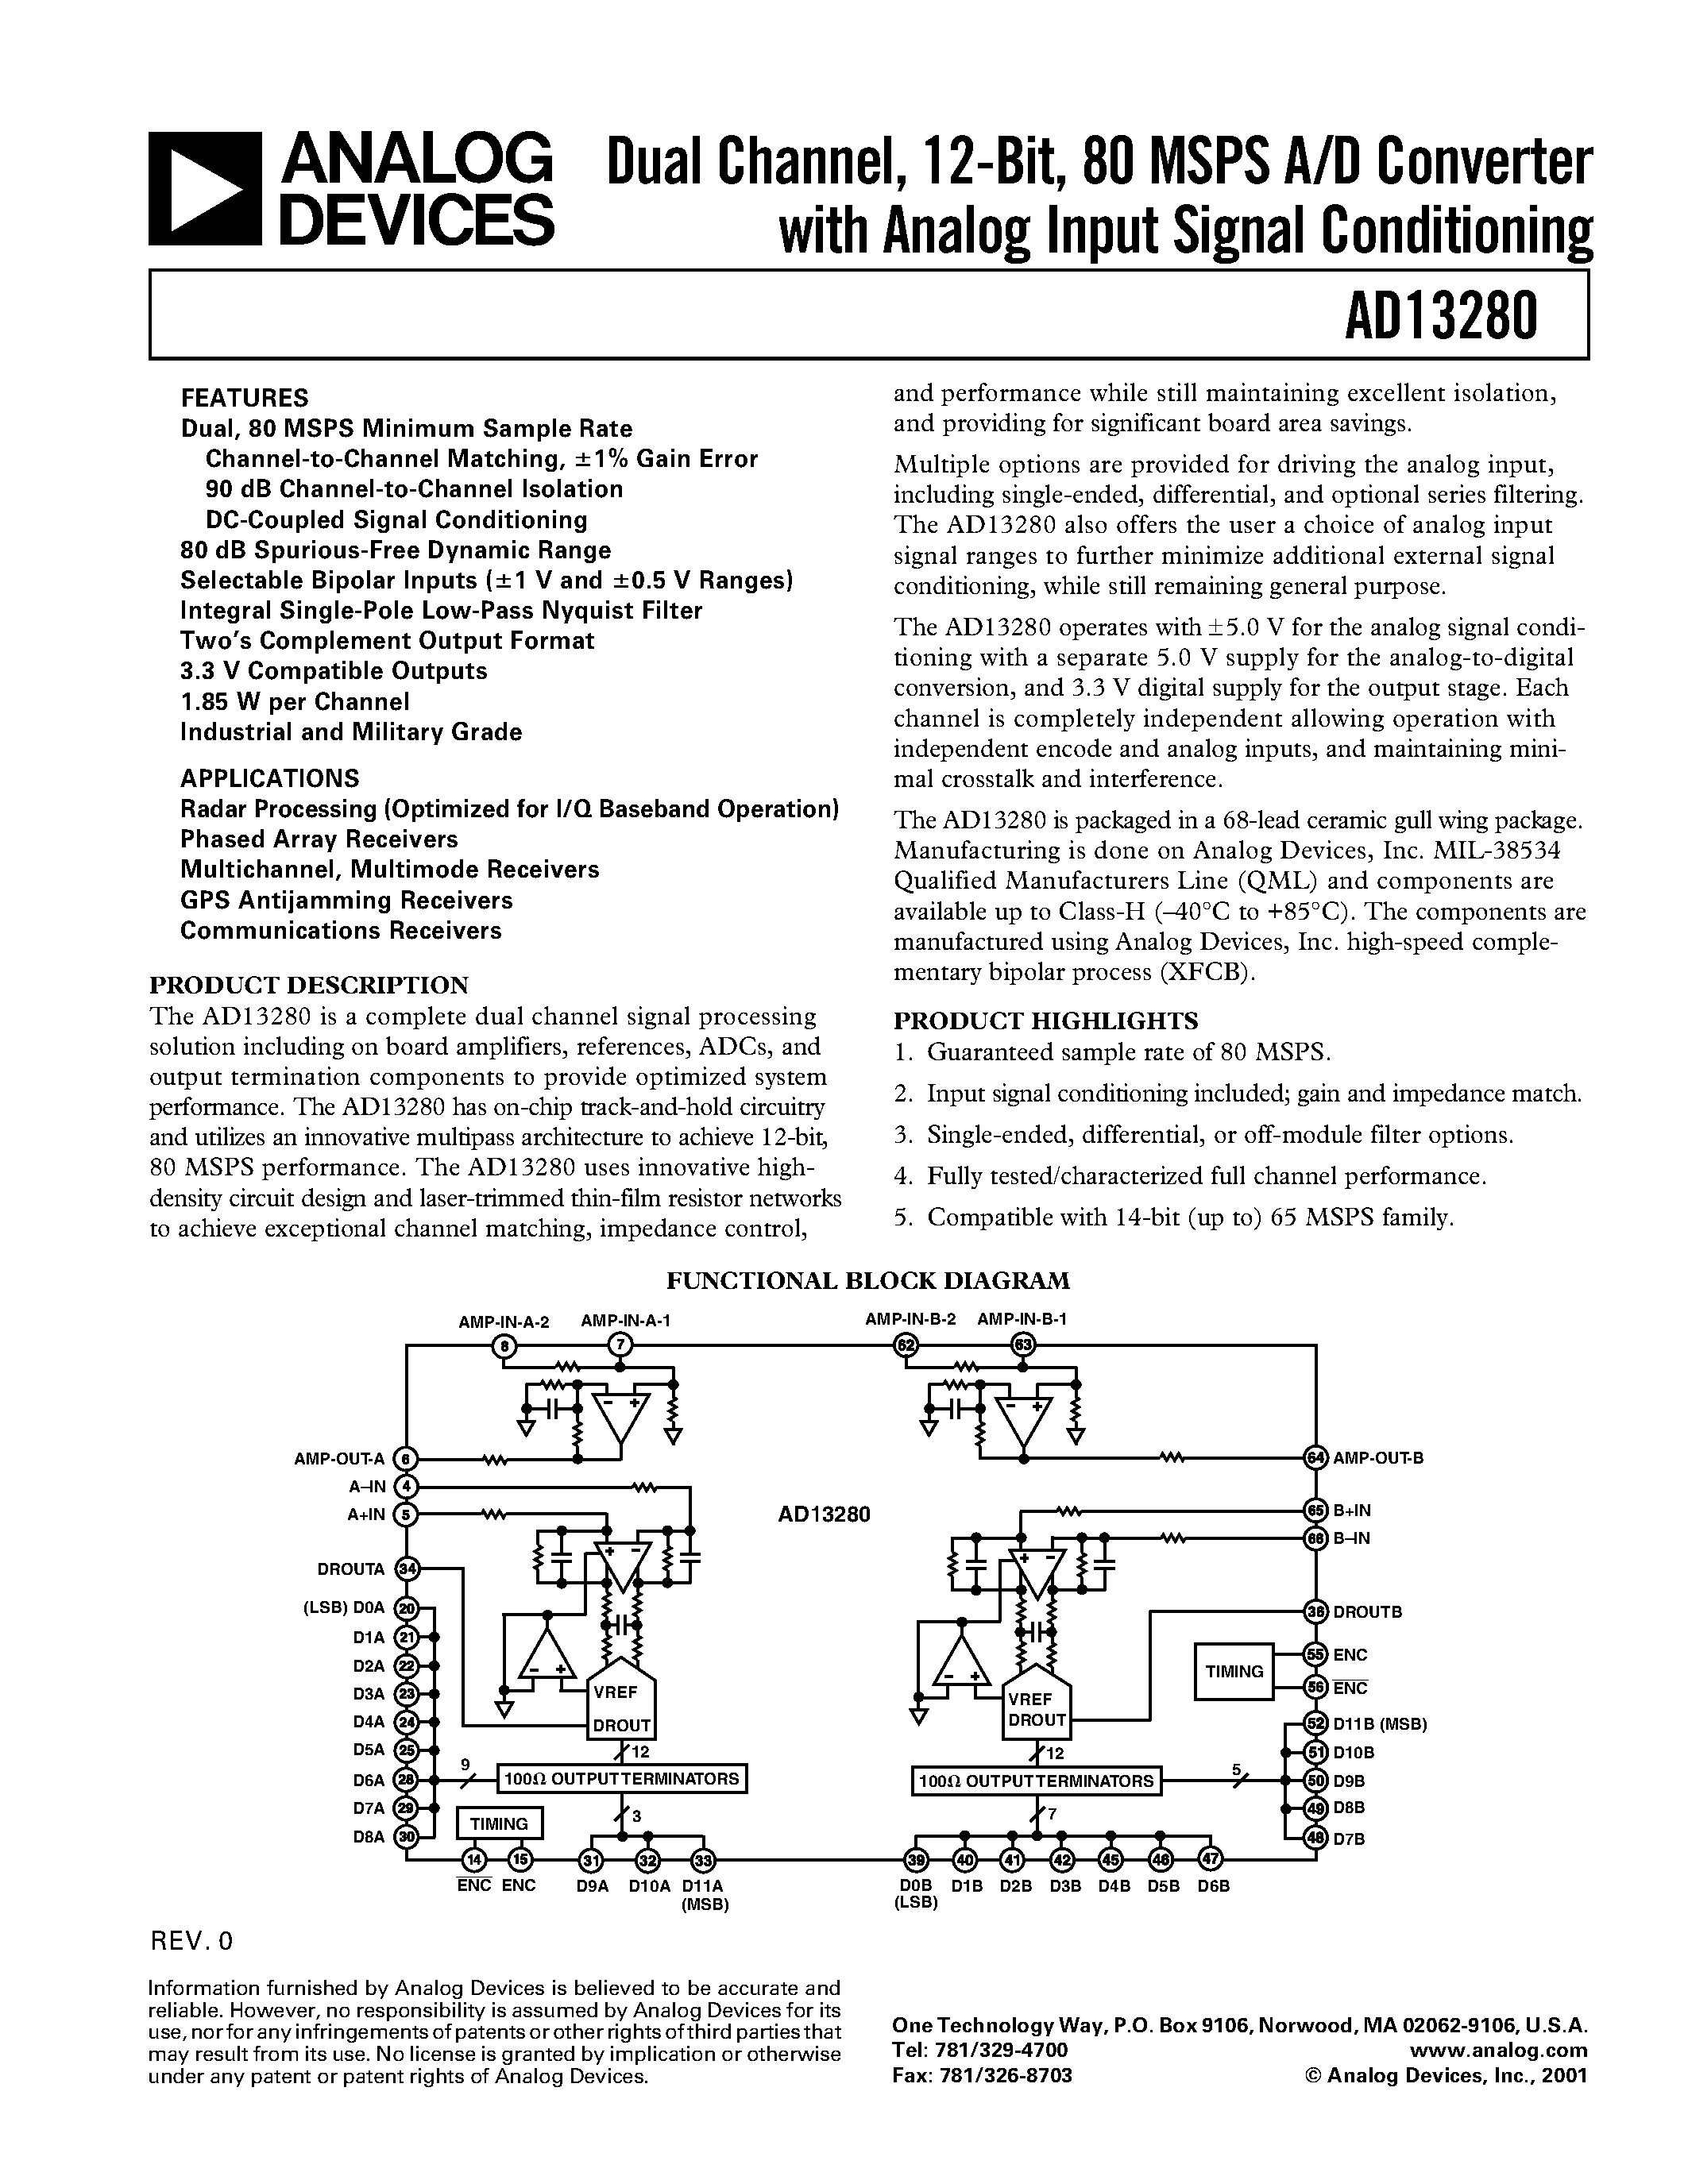 Datasheet AD13280/PCB - Dual Channel/ 12-Bit/ 80 MSPS A/D Converter with Analog Input Signal Conditioning page 1